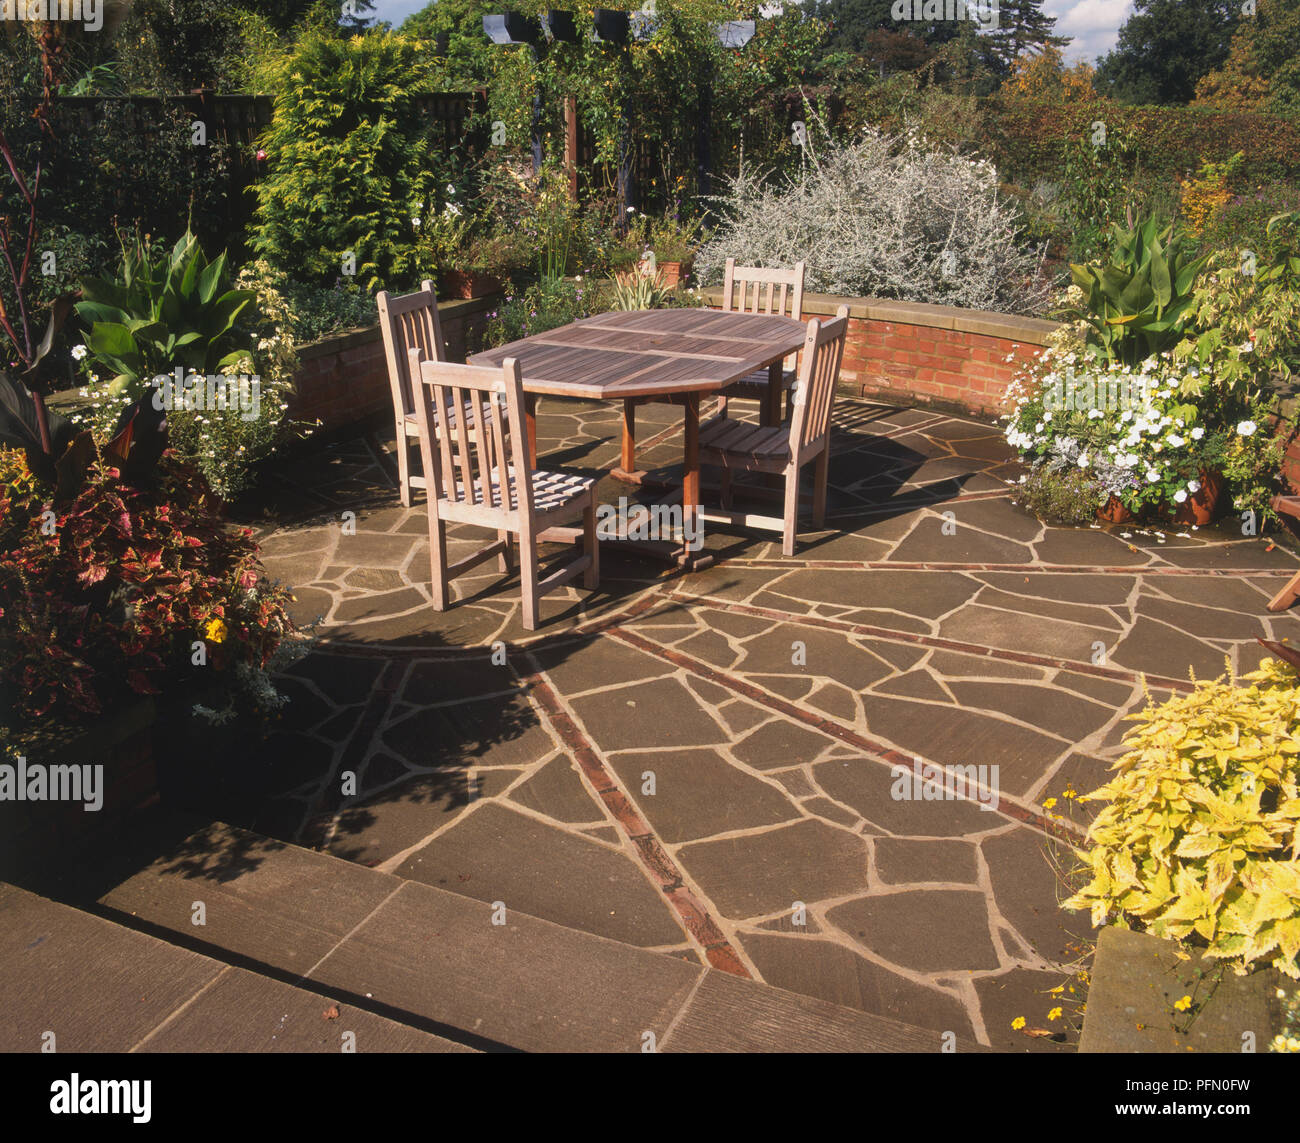 Wooden garden table and four chairs on a patio, floor made of asymmetric paving stones. Stock Photo